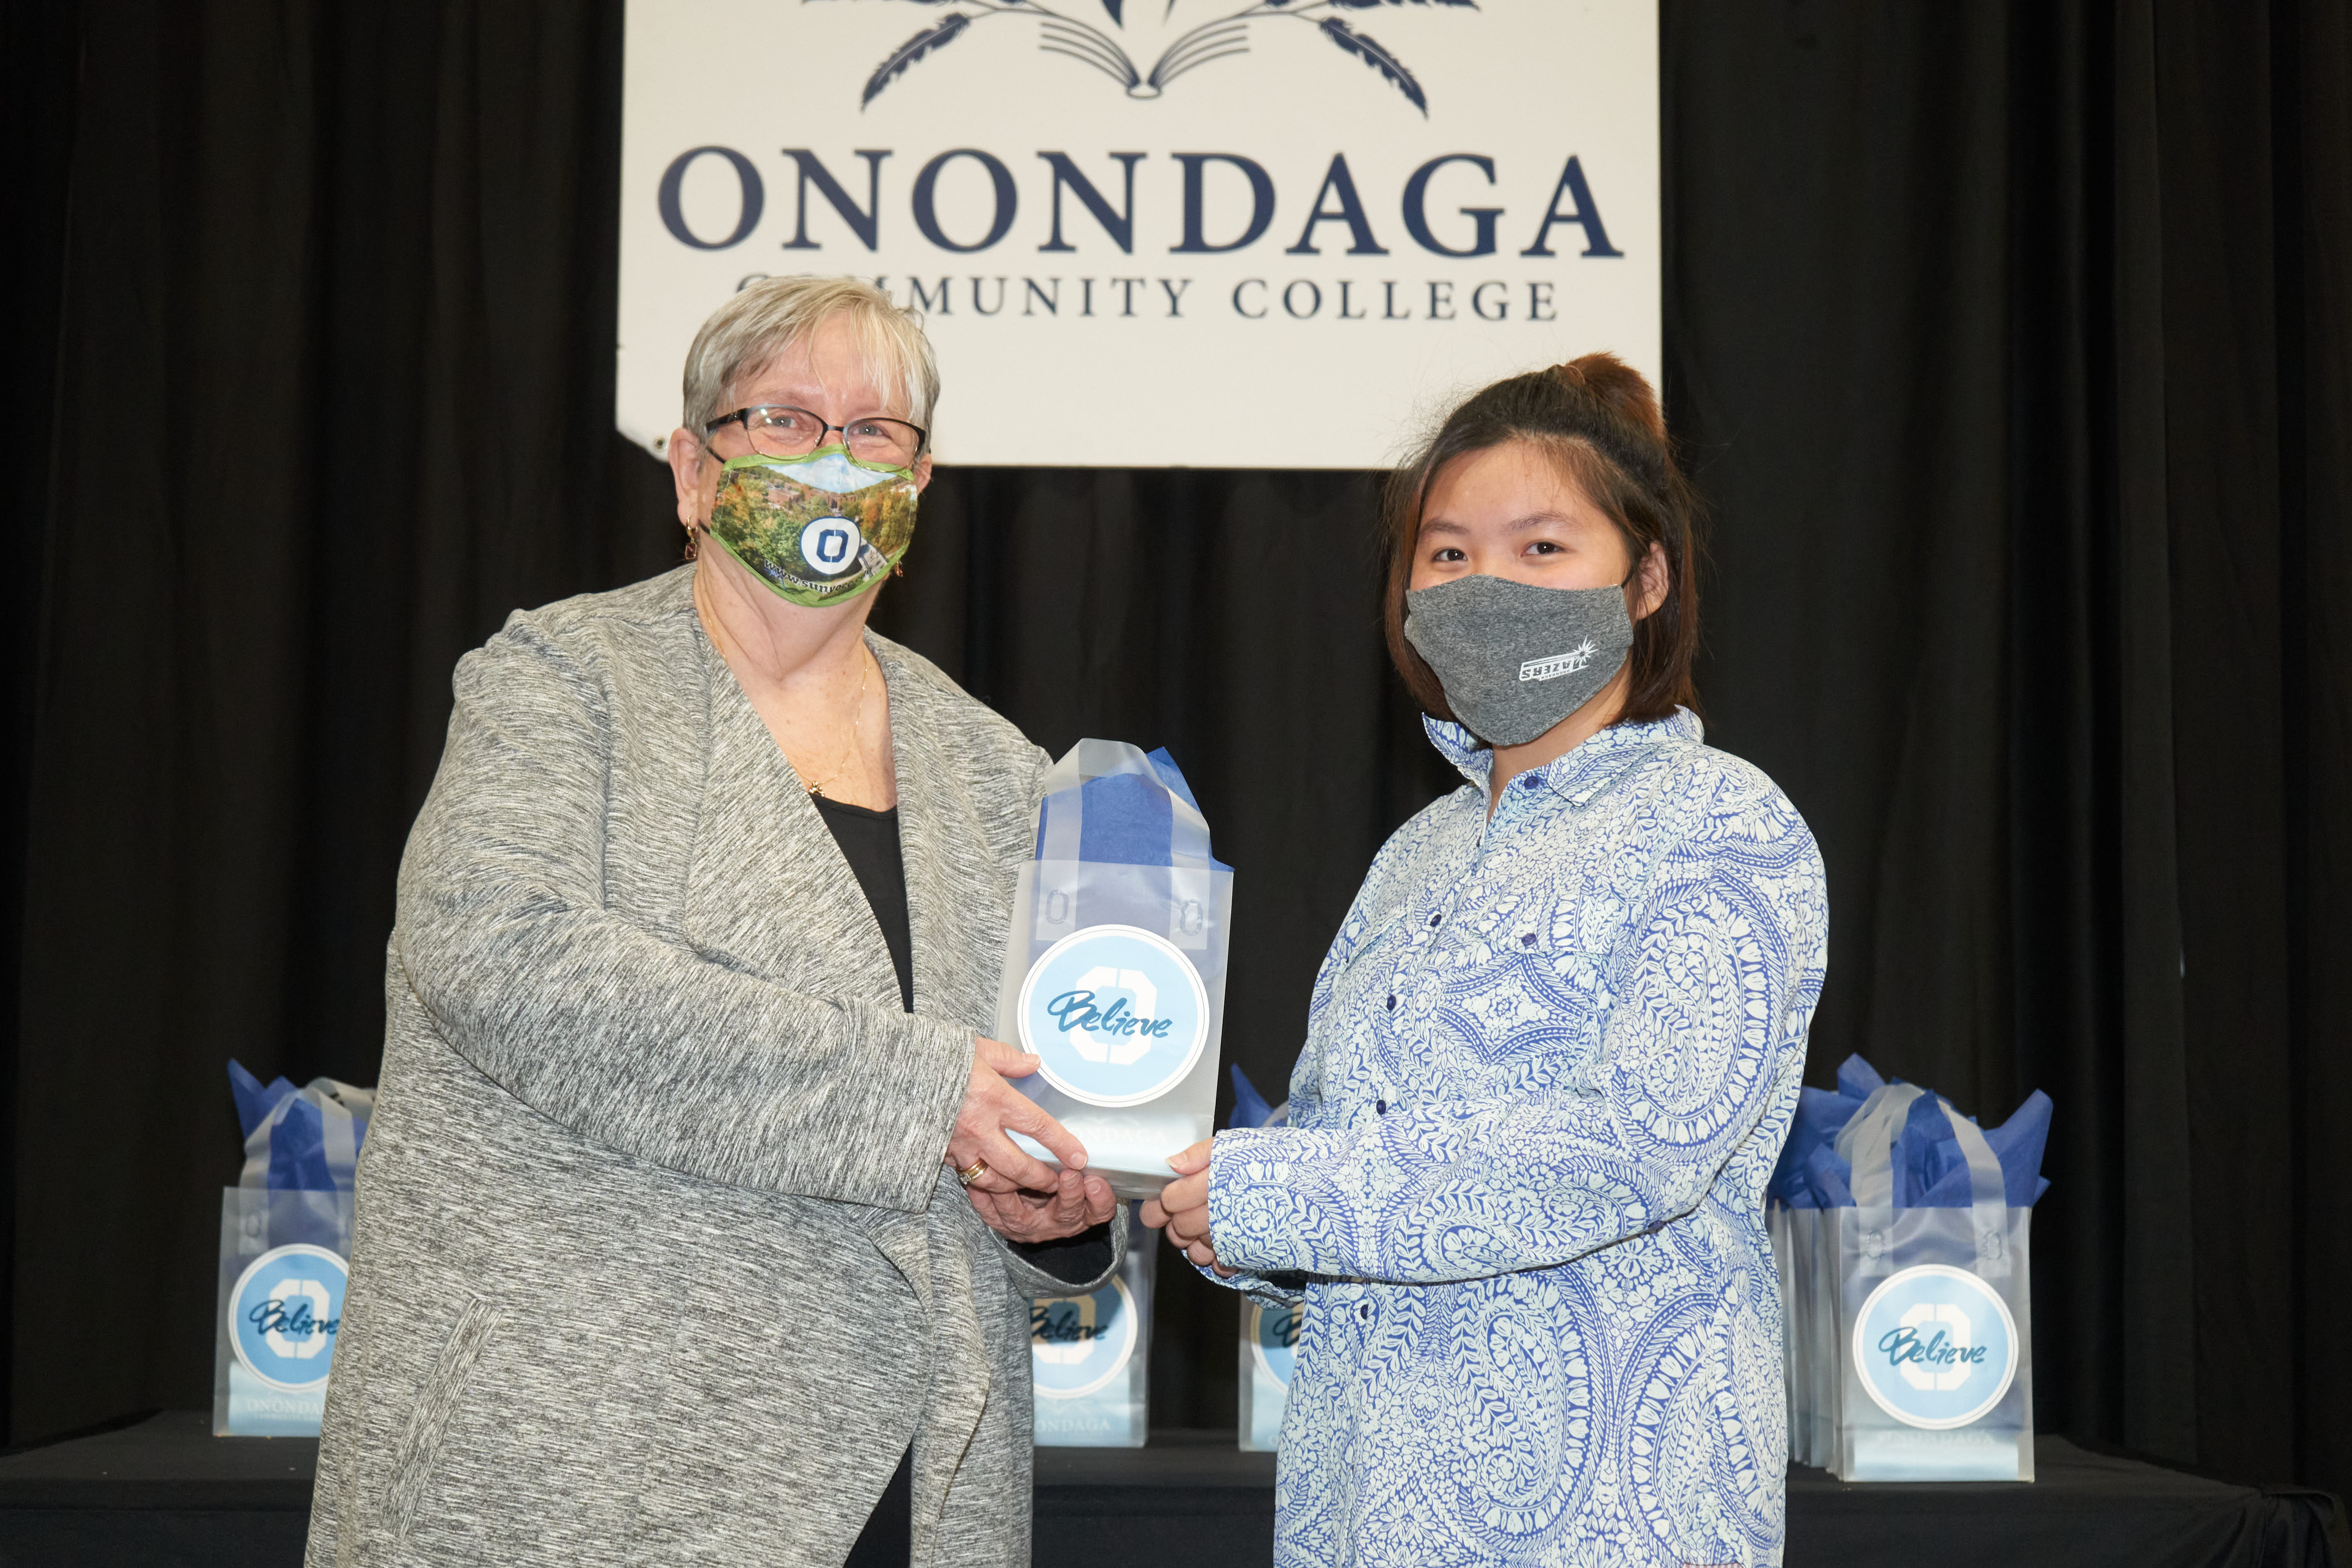 Humanities & Social Sciences Curriculum Honoree Si Po Ra (right) is pictured with OCC President Dr. Casey Crabill (left).